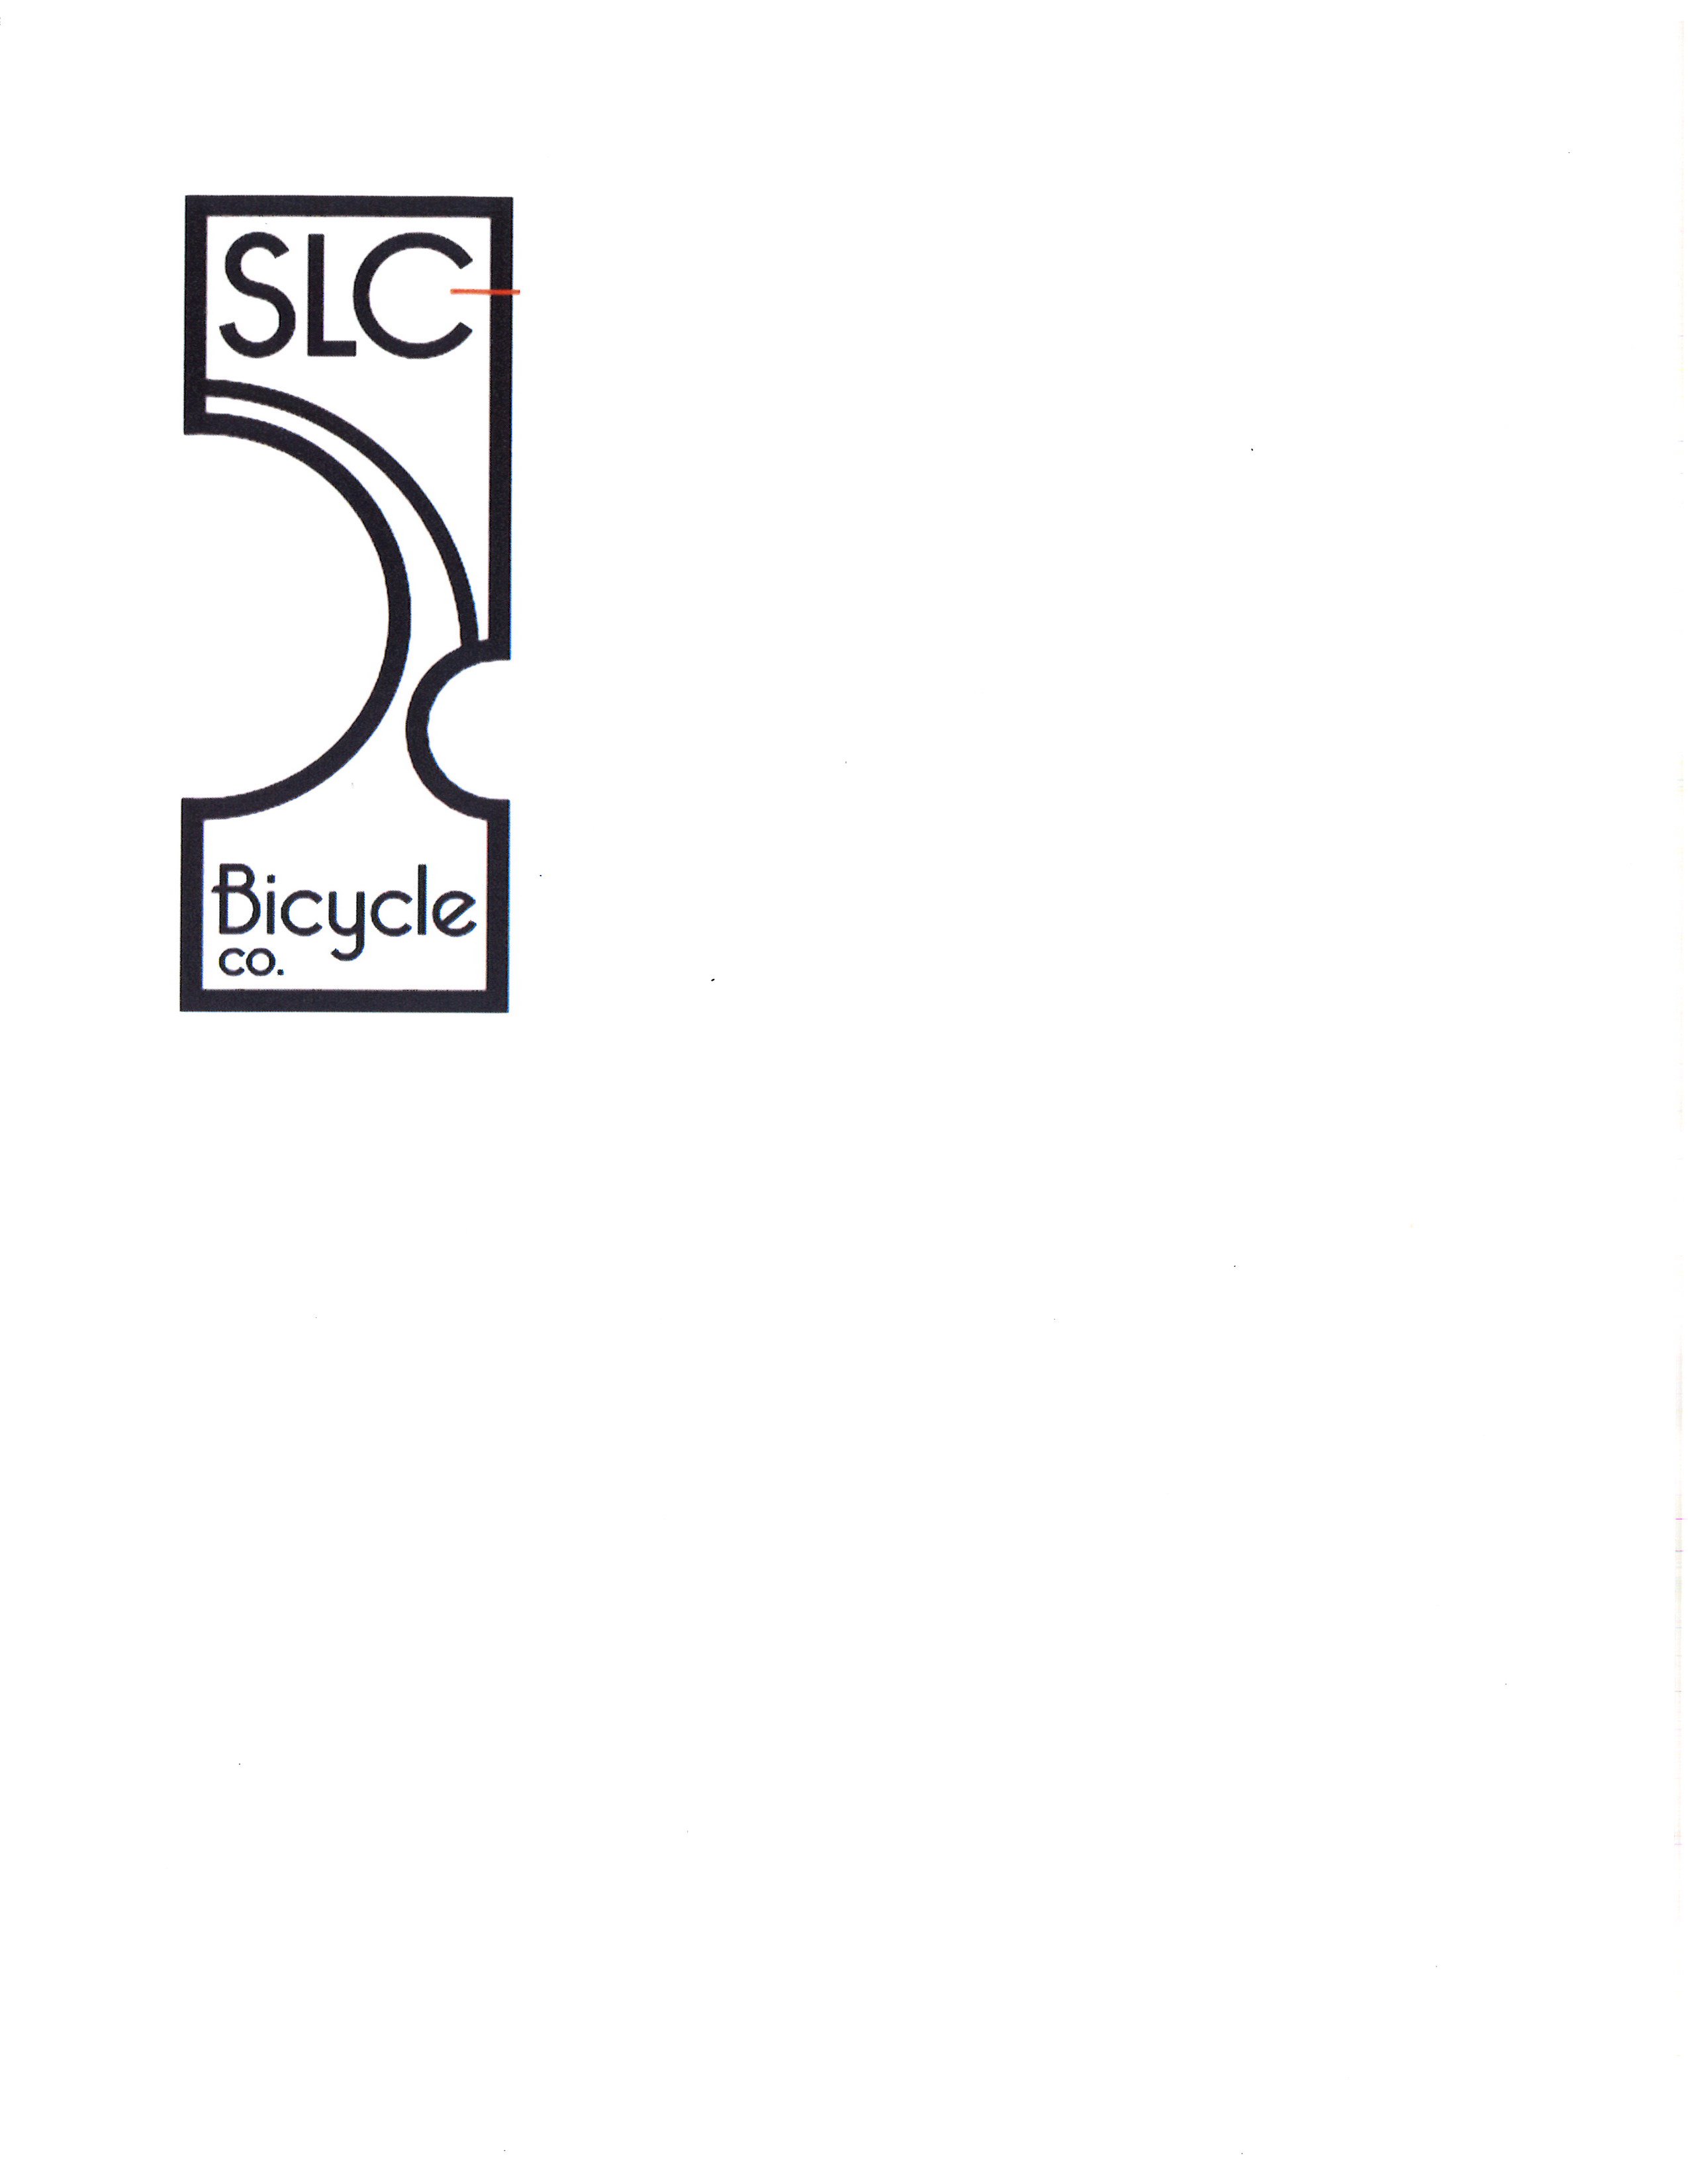  SLC BICYCLE CO.